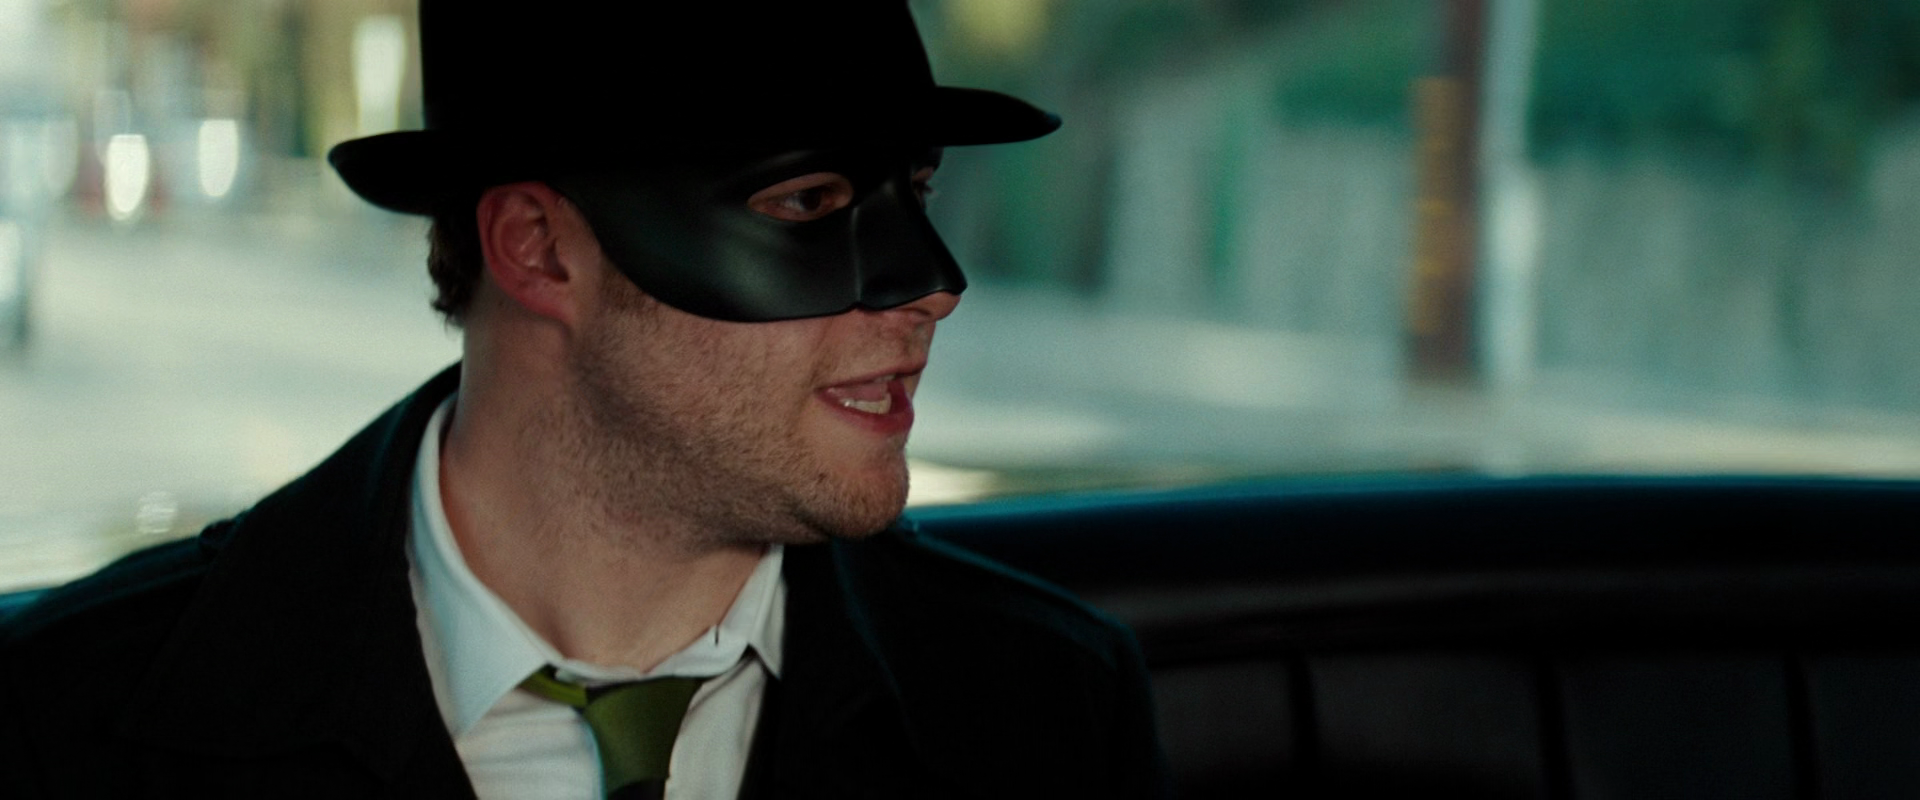 The Green Hornet (Seth Rogen) and Kato (Jay Chou) make their escape after blowing up Benjamin Chudnofsky's (Christoph Waltz) meth labs in The Green Hornet (2011), Sony Pictures